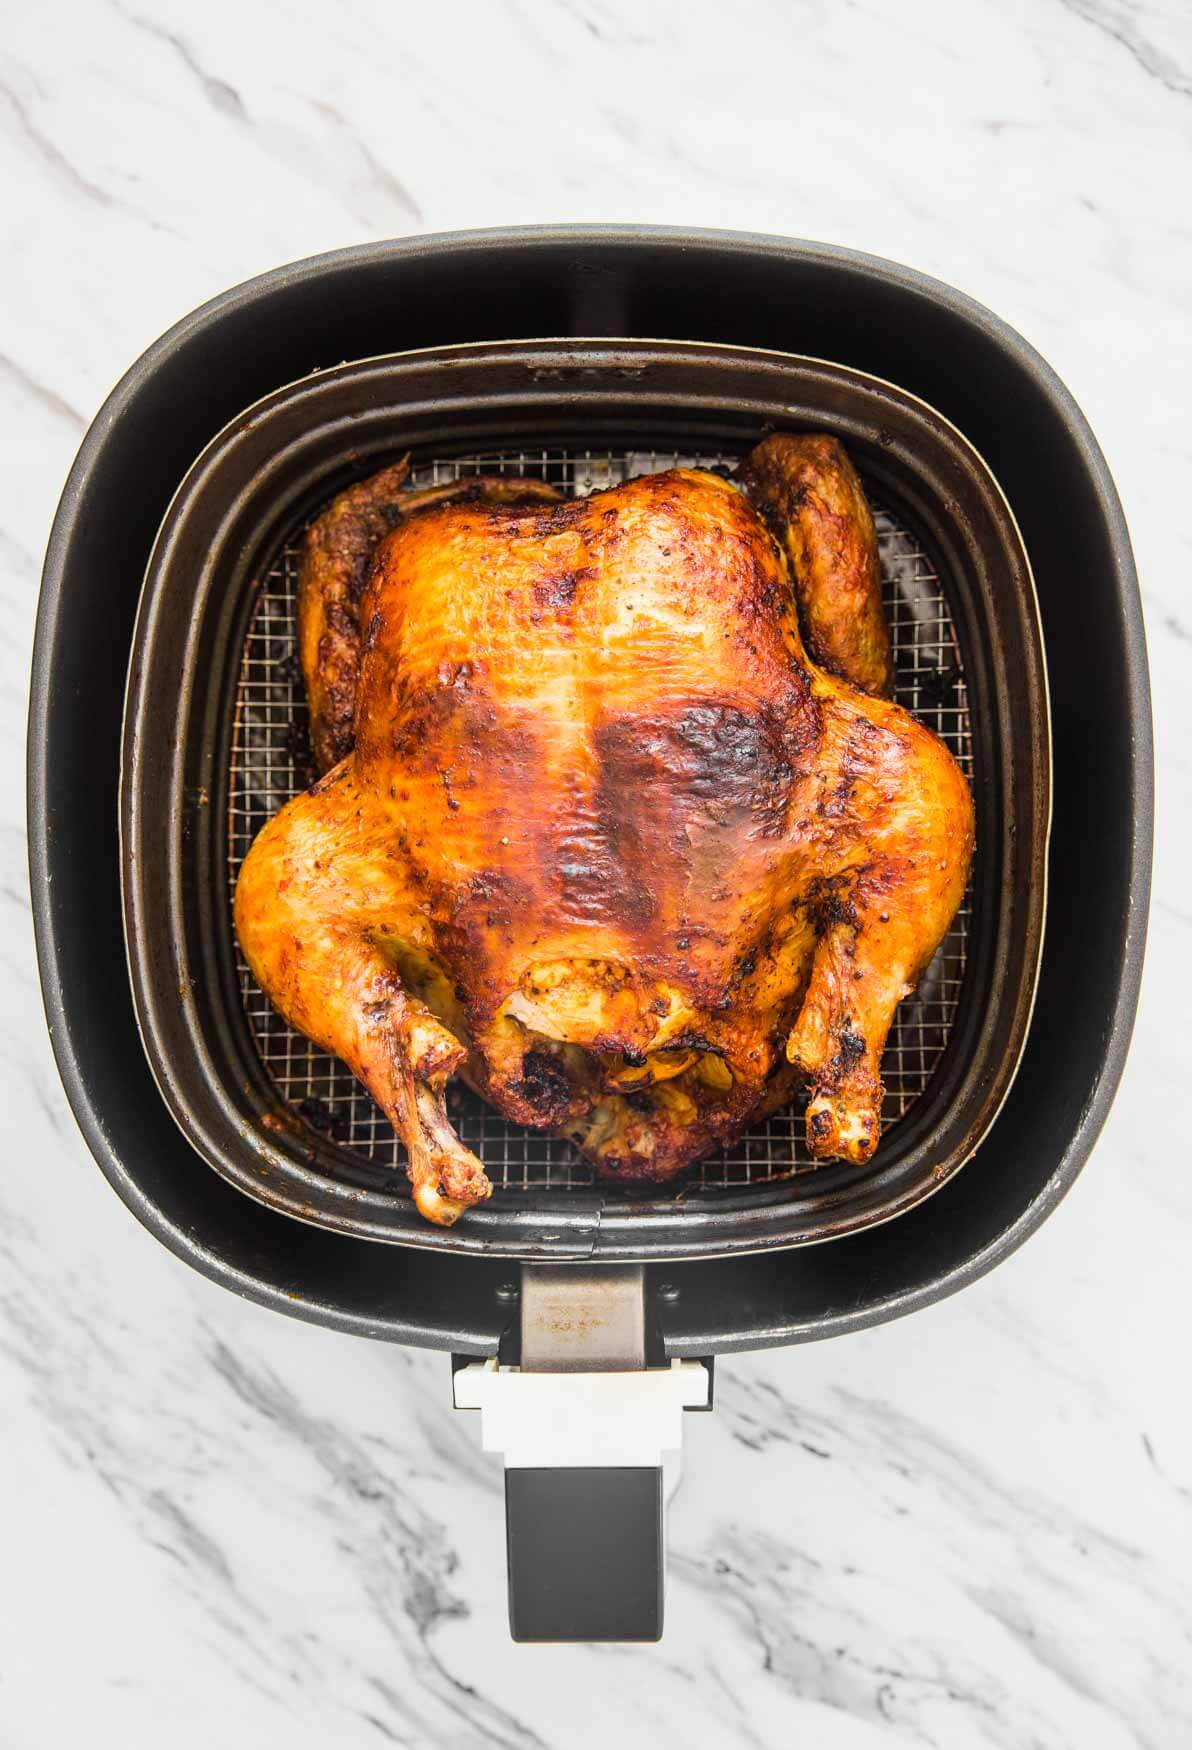 Roasted whole chicken in Air Fryer basket